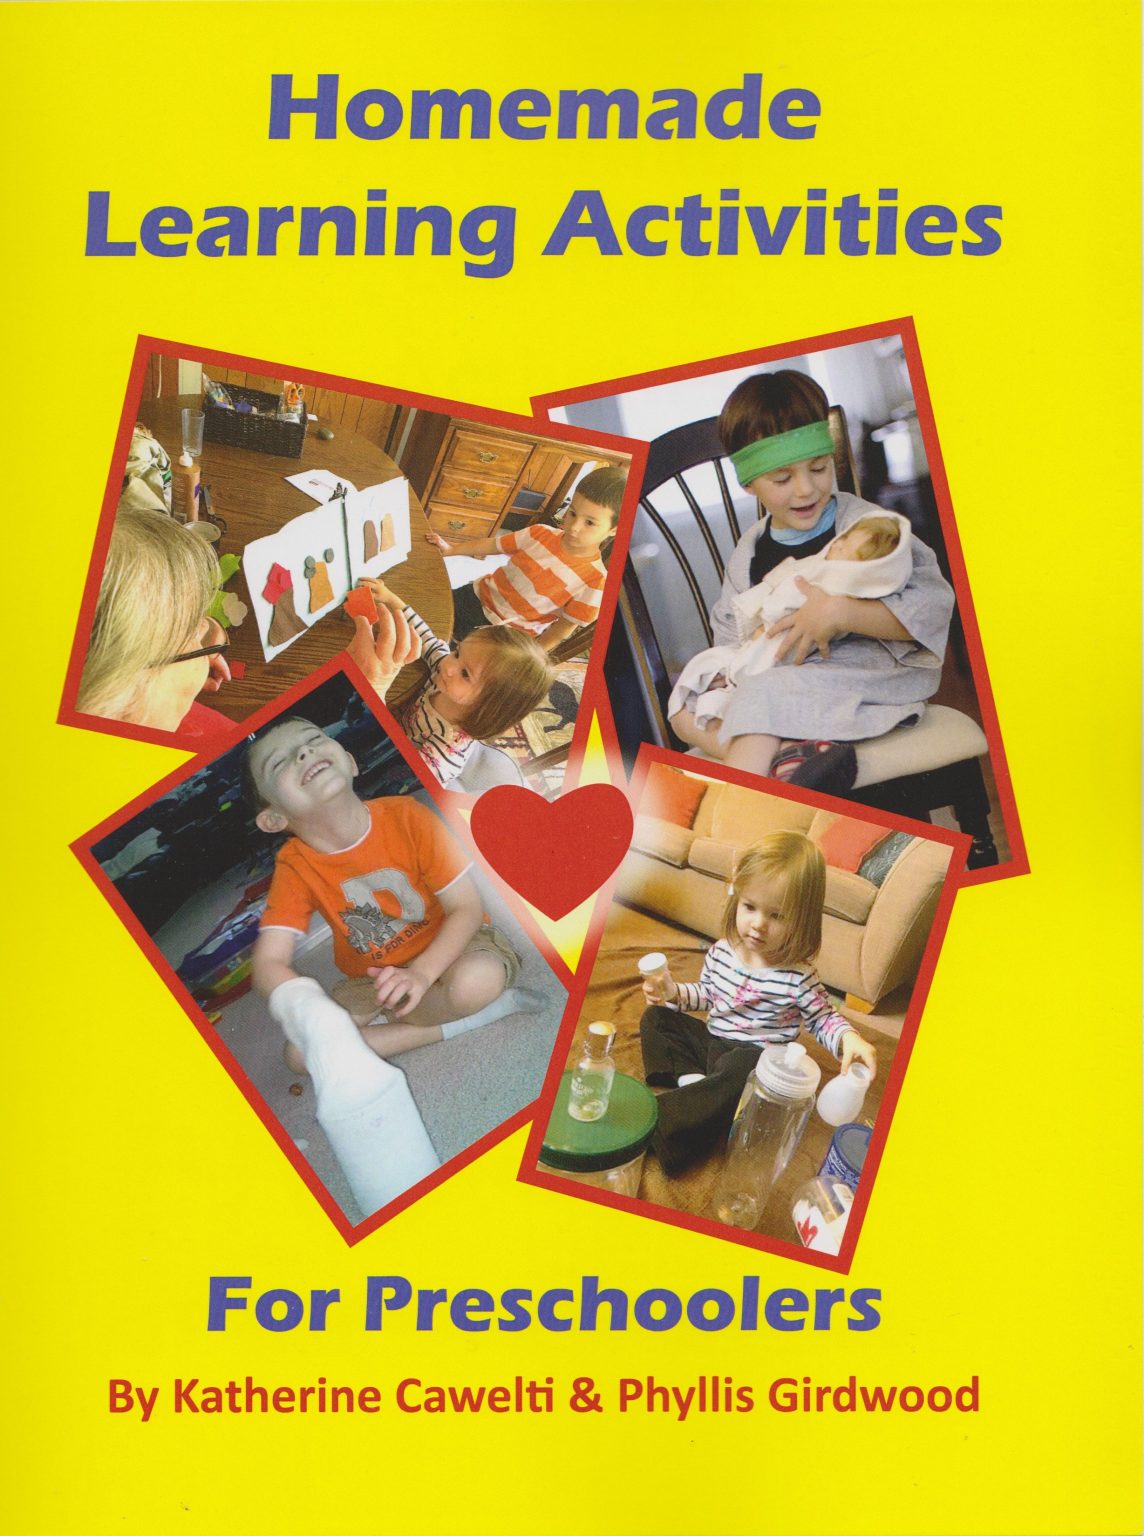 homemade-learning-activities-for-preschoolers-kids-at-heart